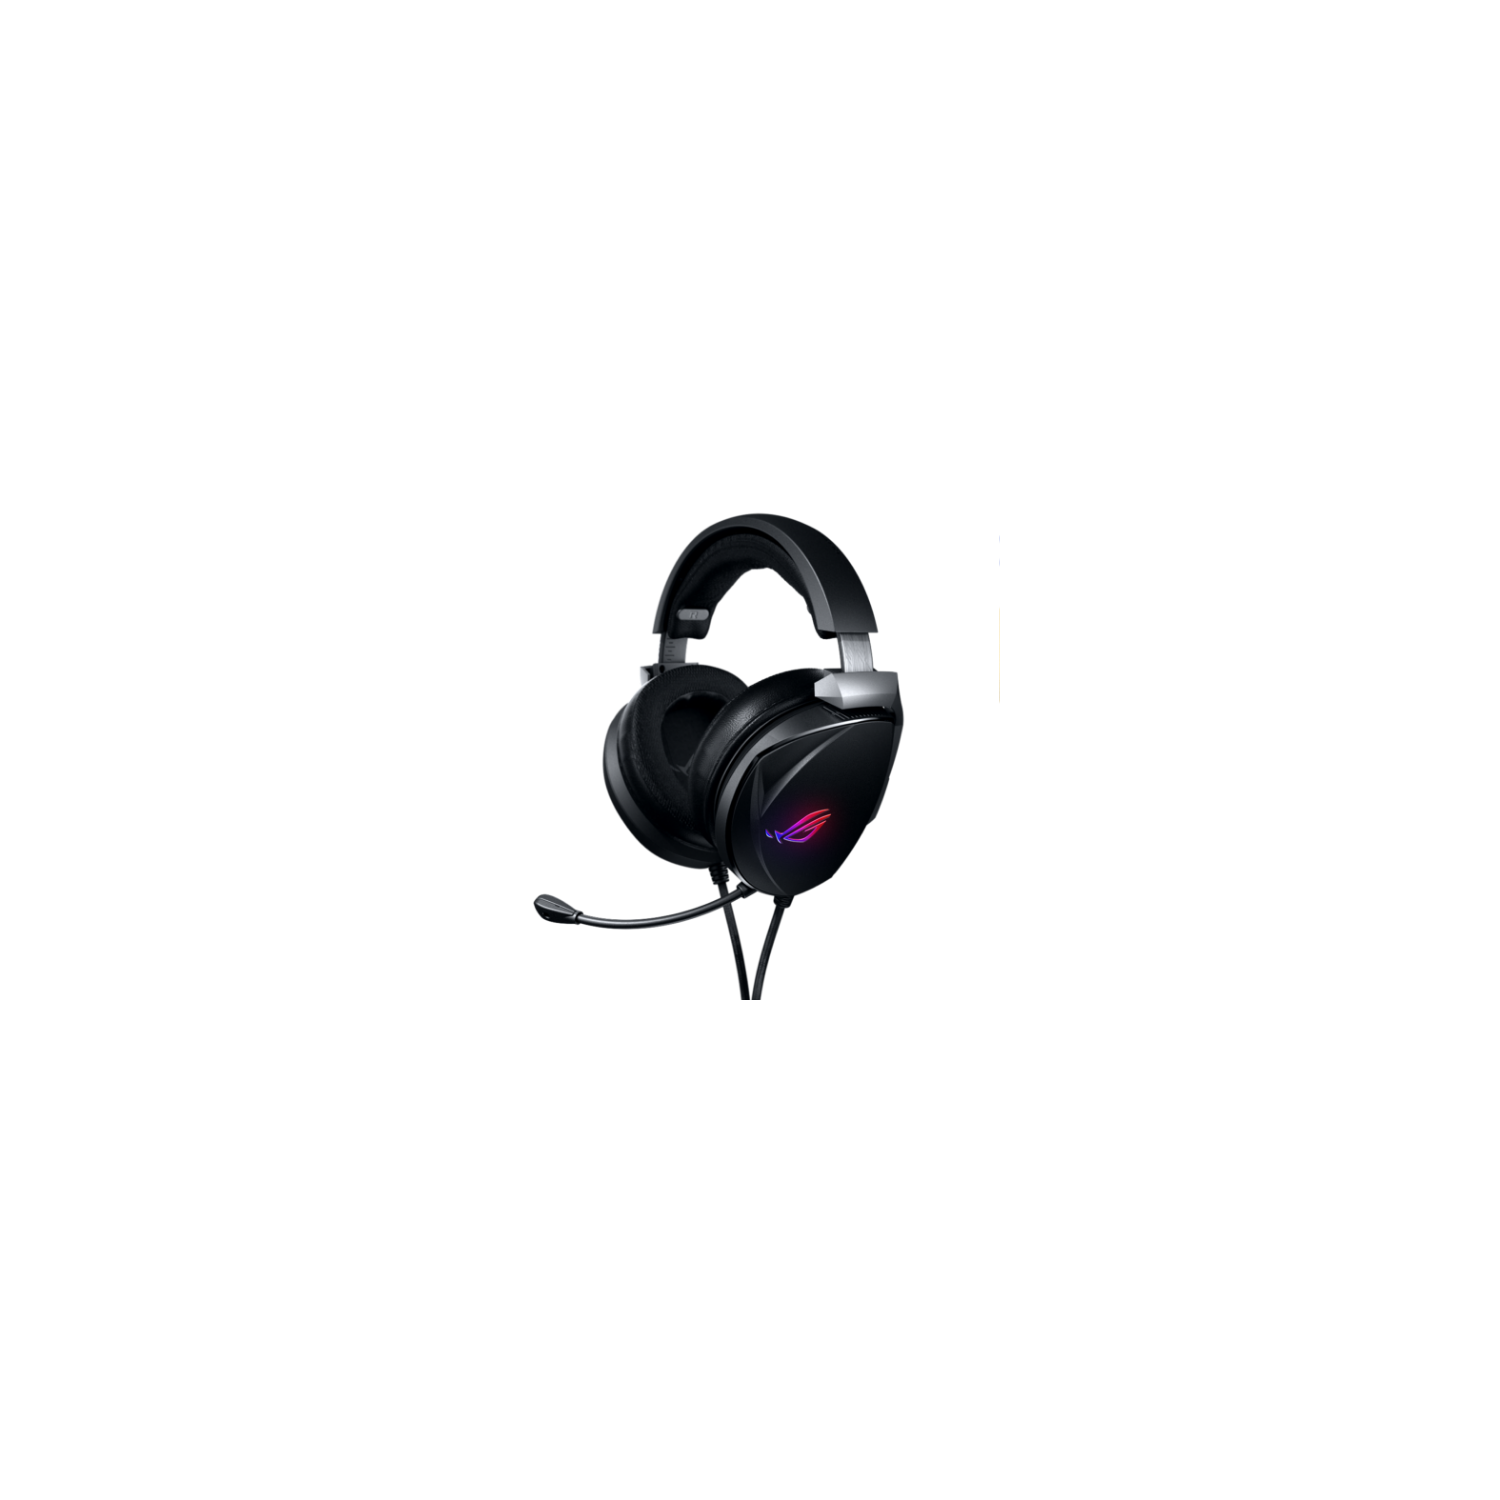 Asus ROG Theta 7.1 Over-Ear Noise Cancellation and Isolation Headphones with artificial intelligence microphone (ROG THETA 7.1) - Brand New